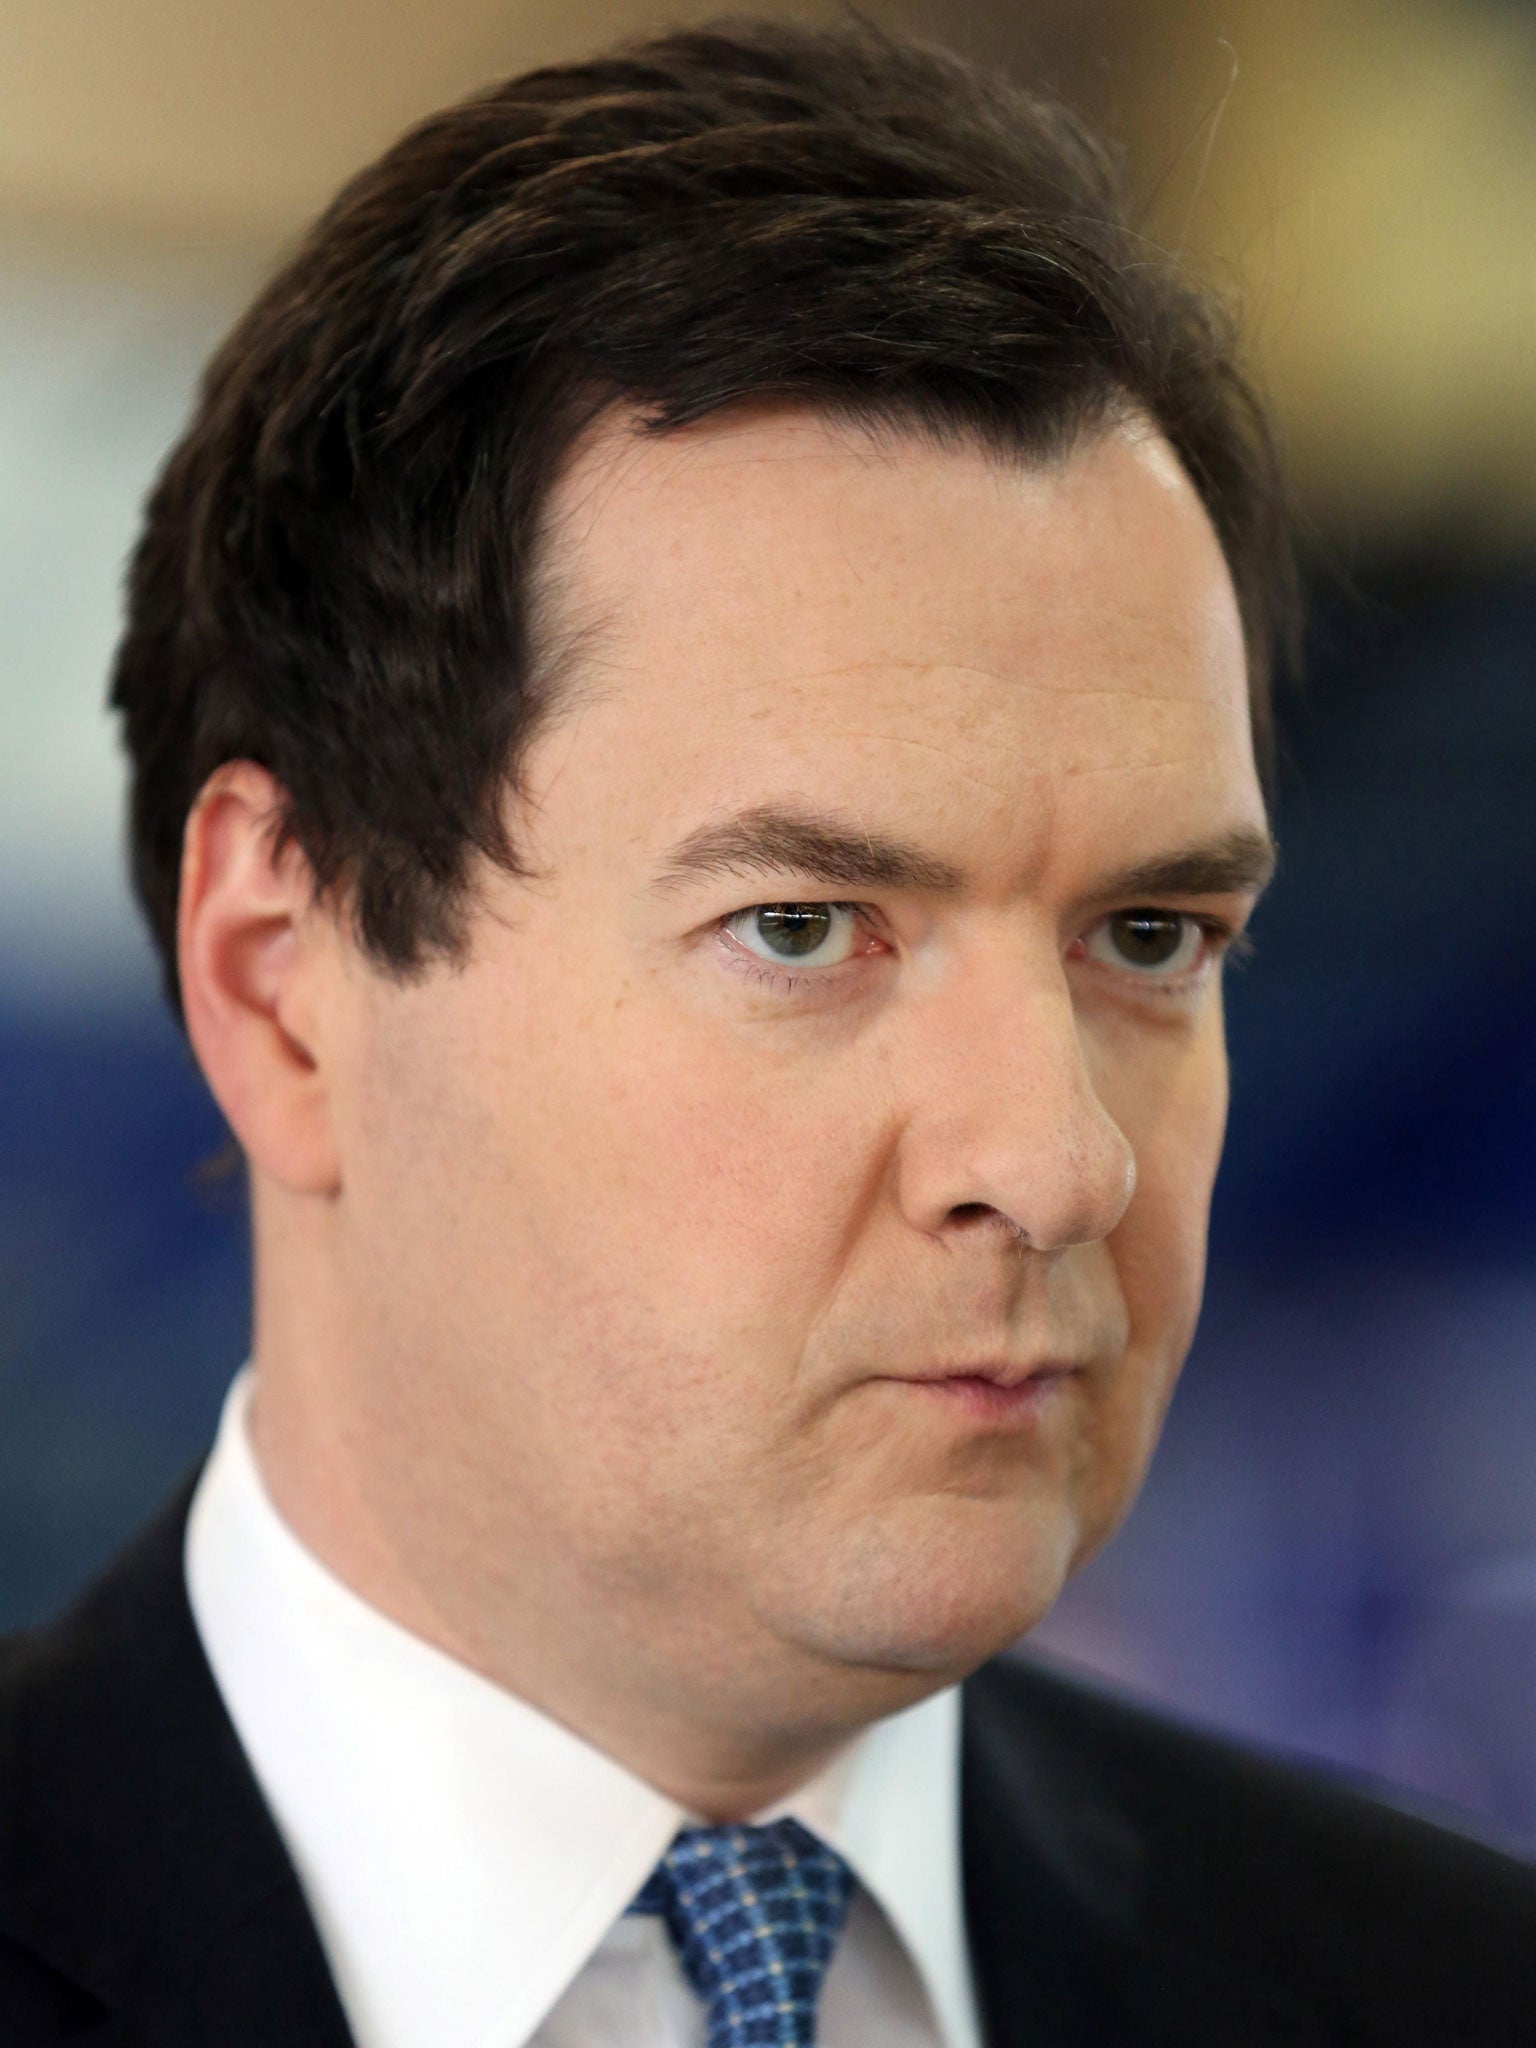 Chancellor George Osborne admitted he had never been to a food bank